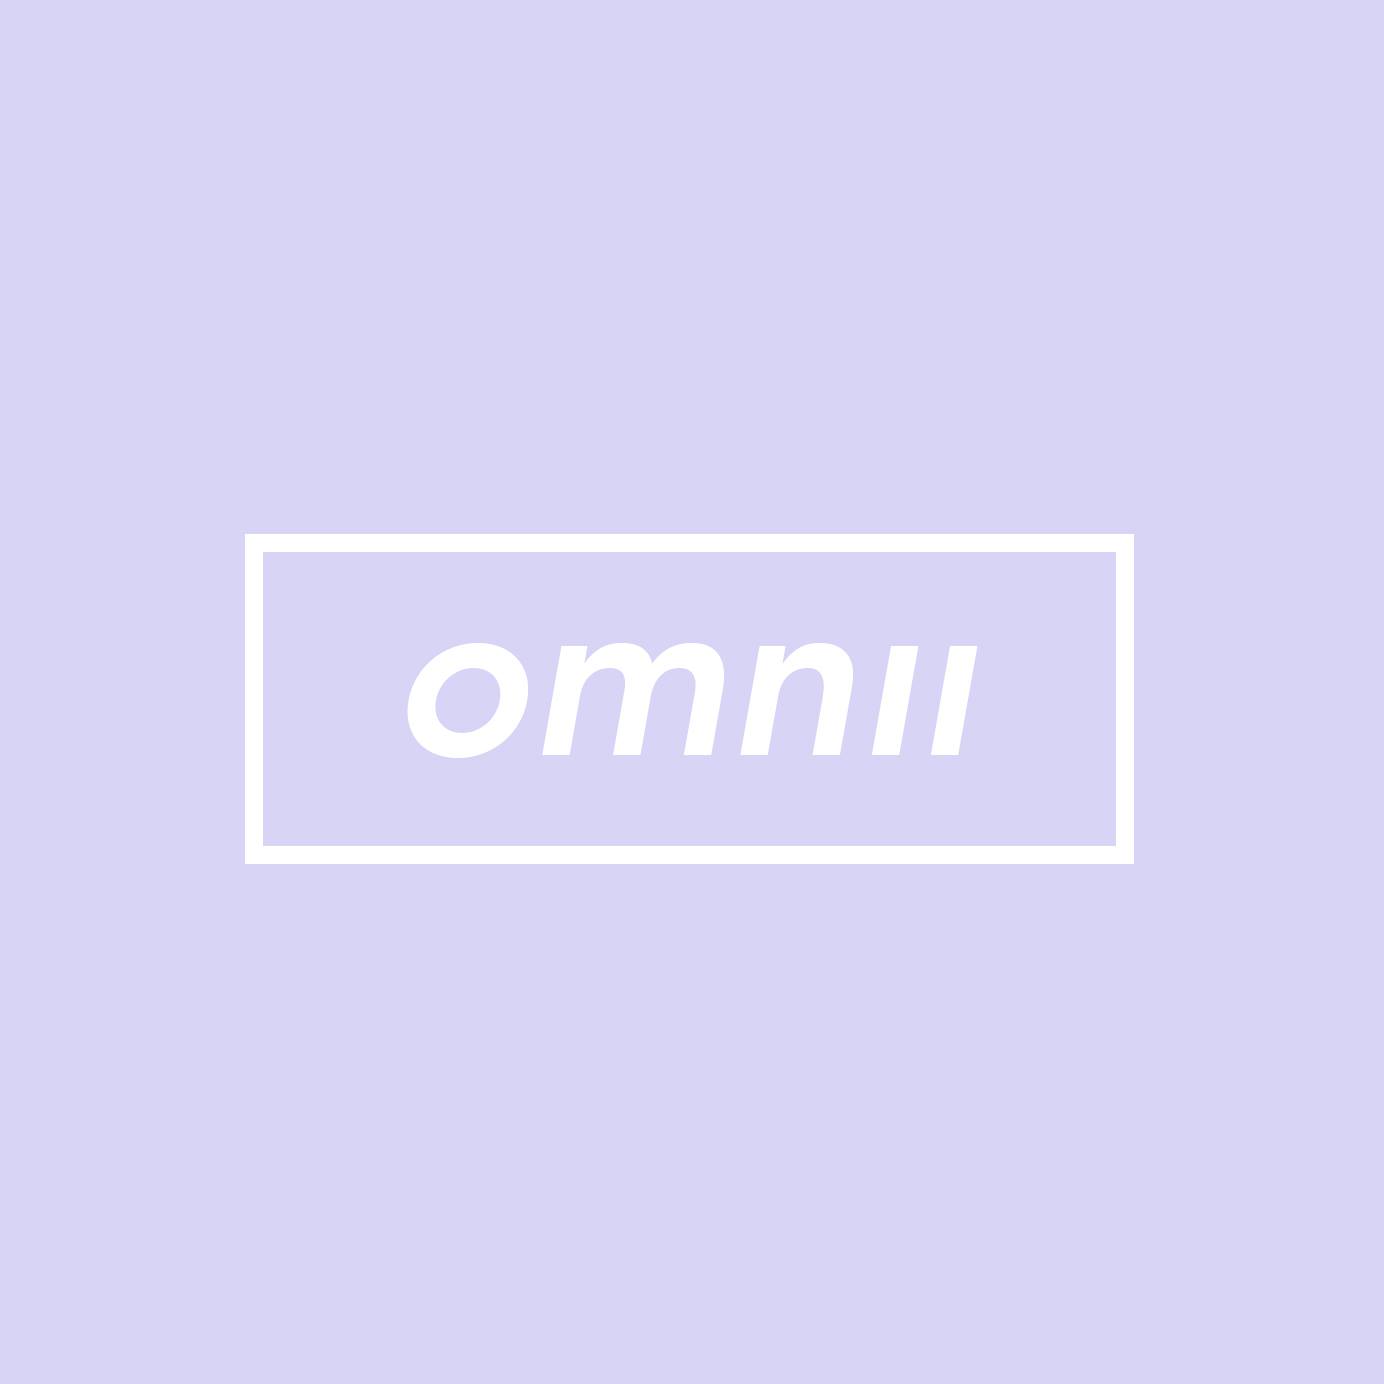 Omnii: The Open Fund for Organisations